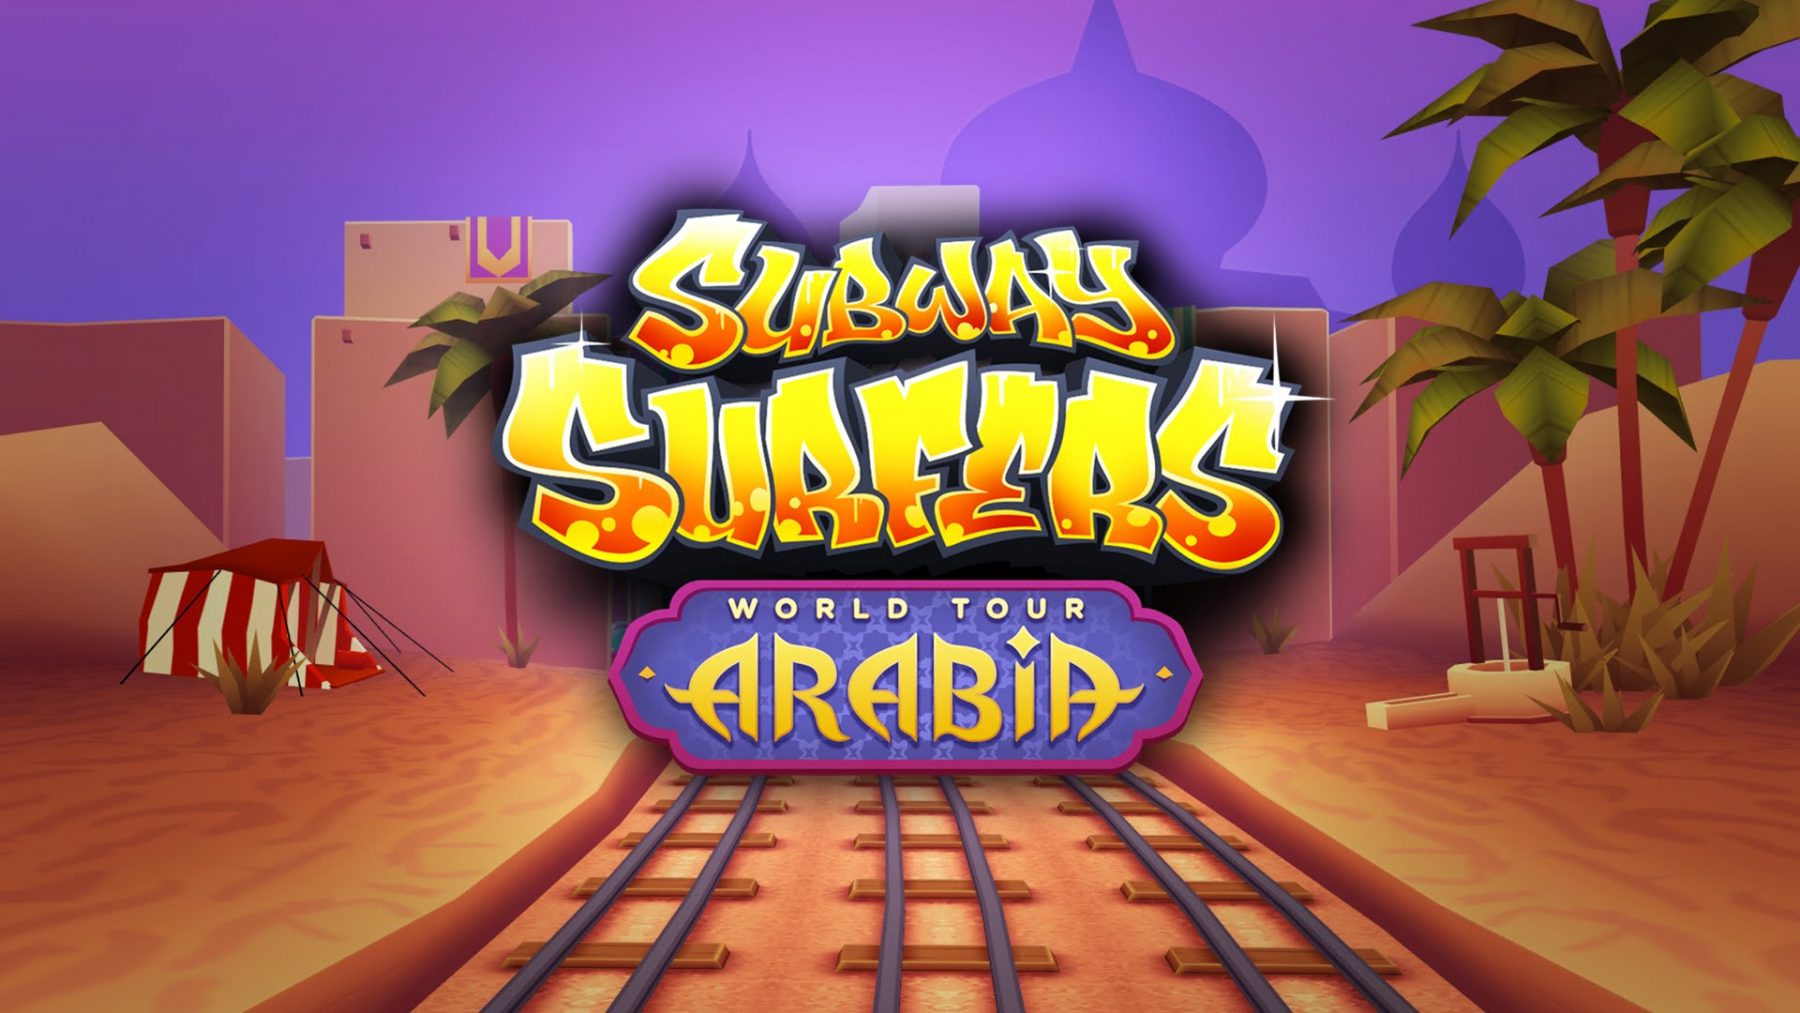 Subway Surfers for Windows Phone, Android, iOS Adds World Tour to Arabia